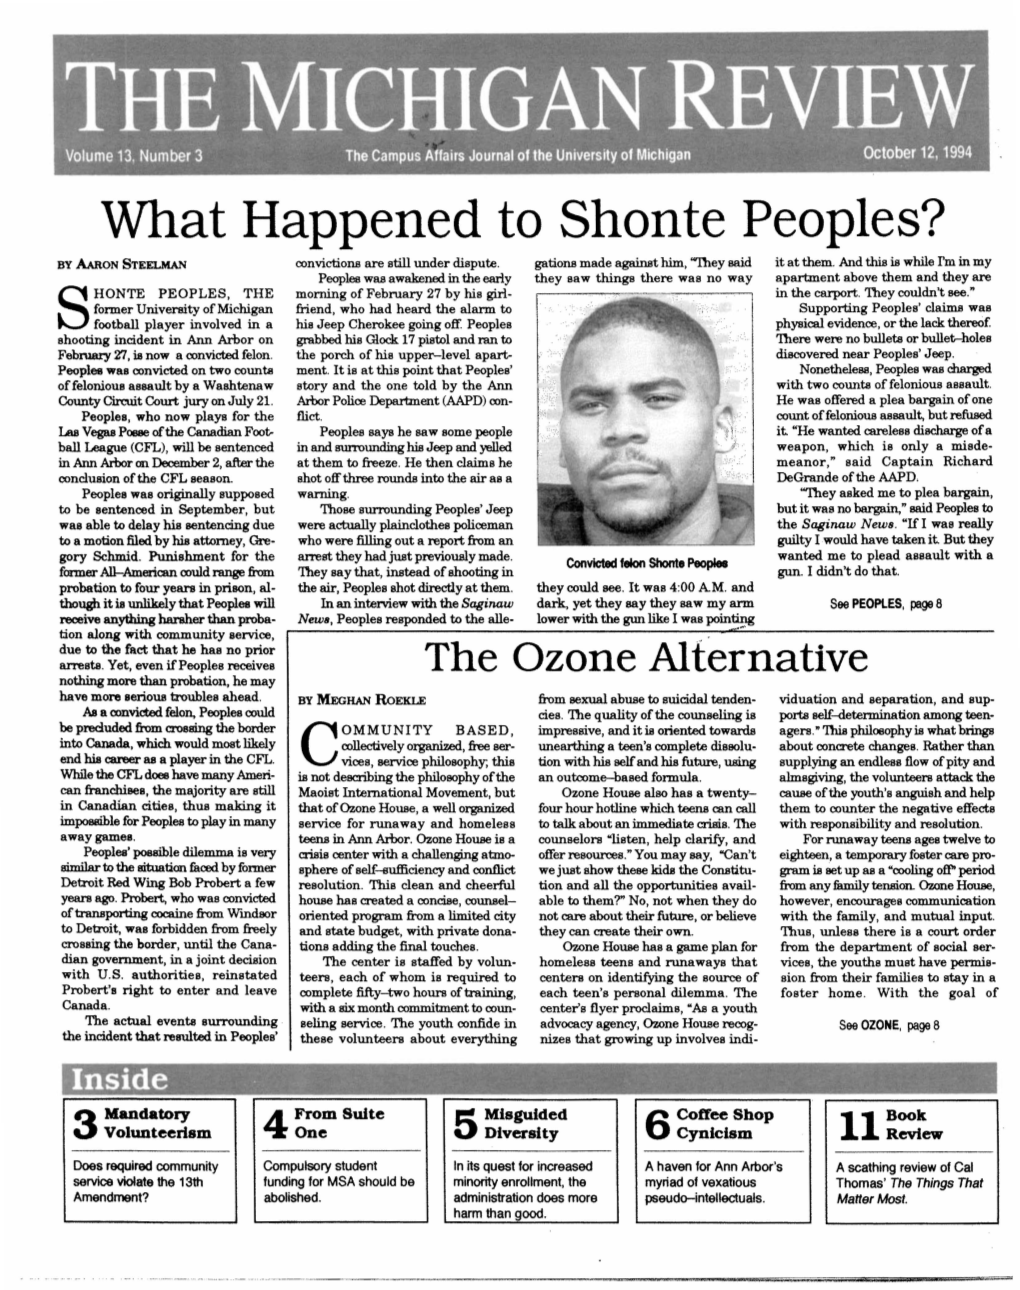 What Happened to Shonte Peoples? by AARON STEELMAN Convictions Are Still Under Dispute